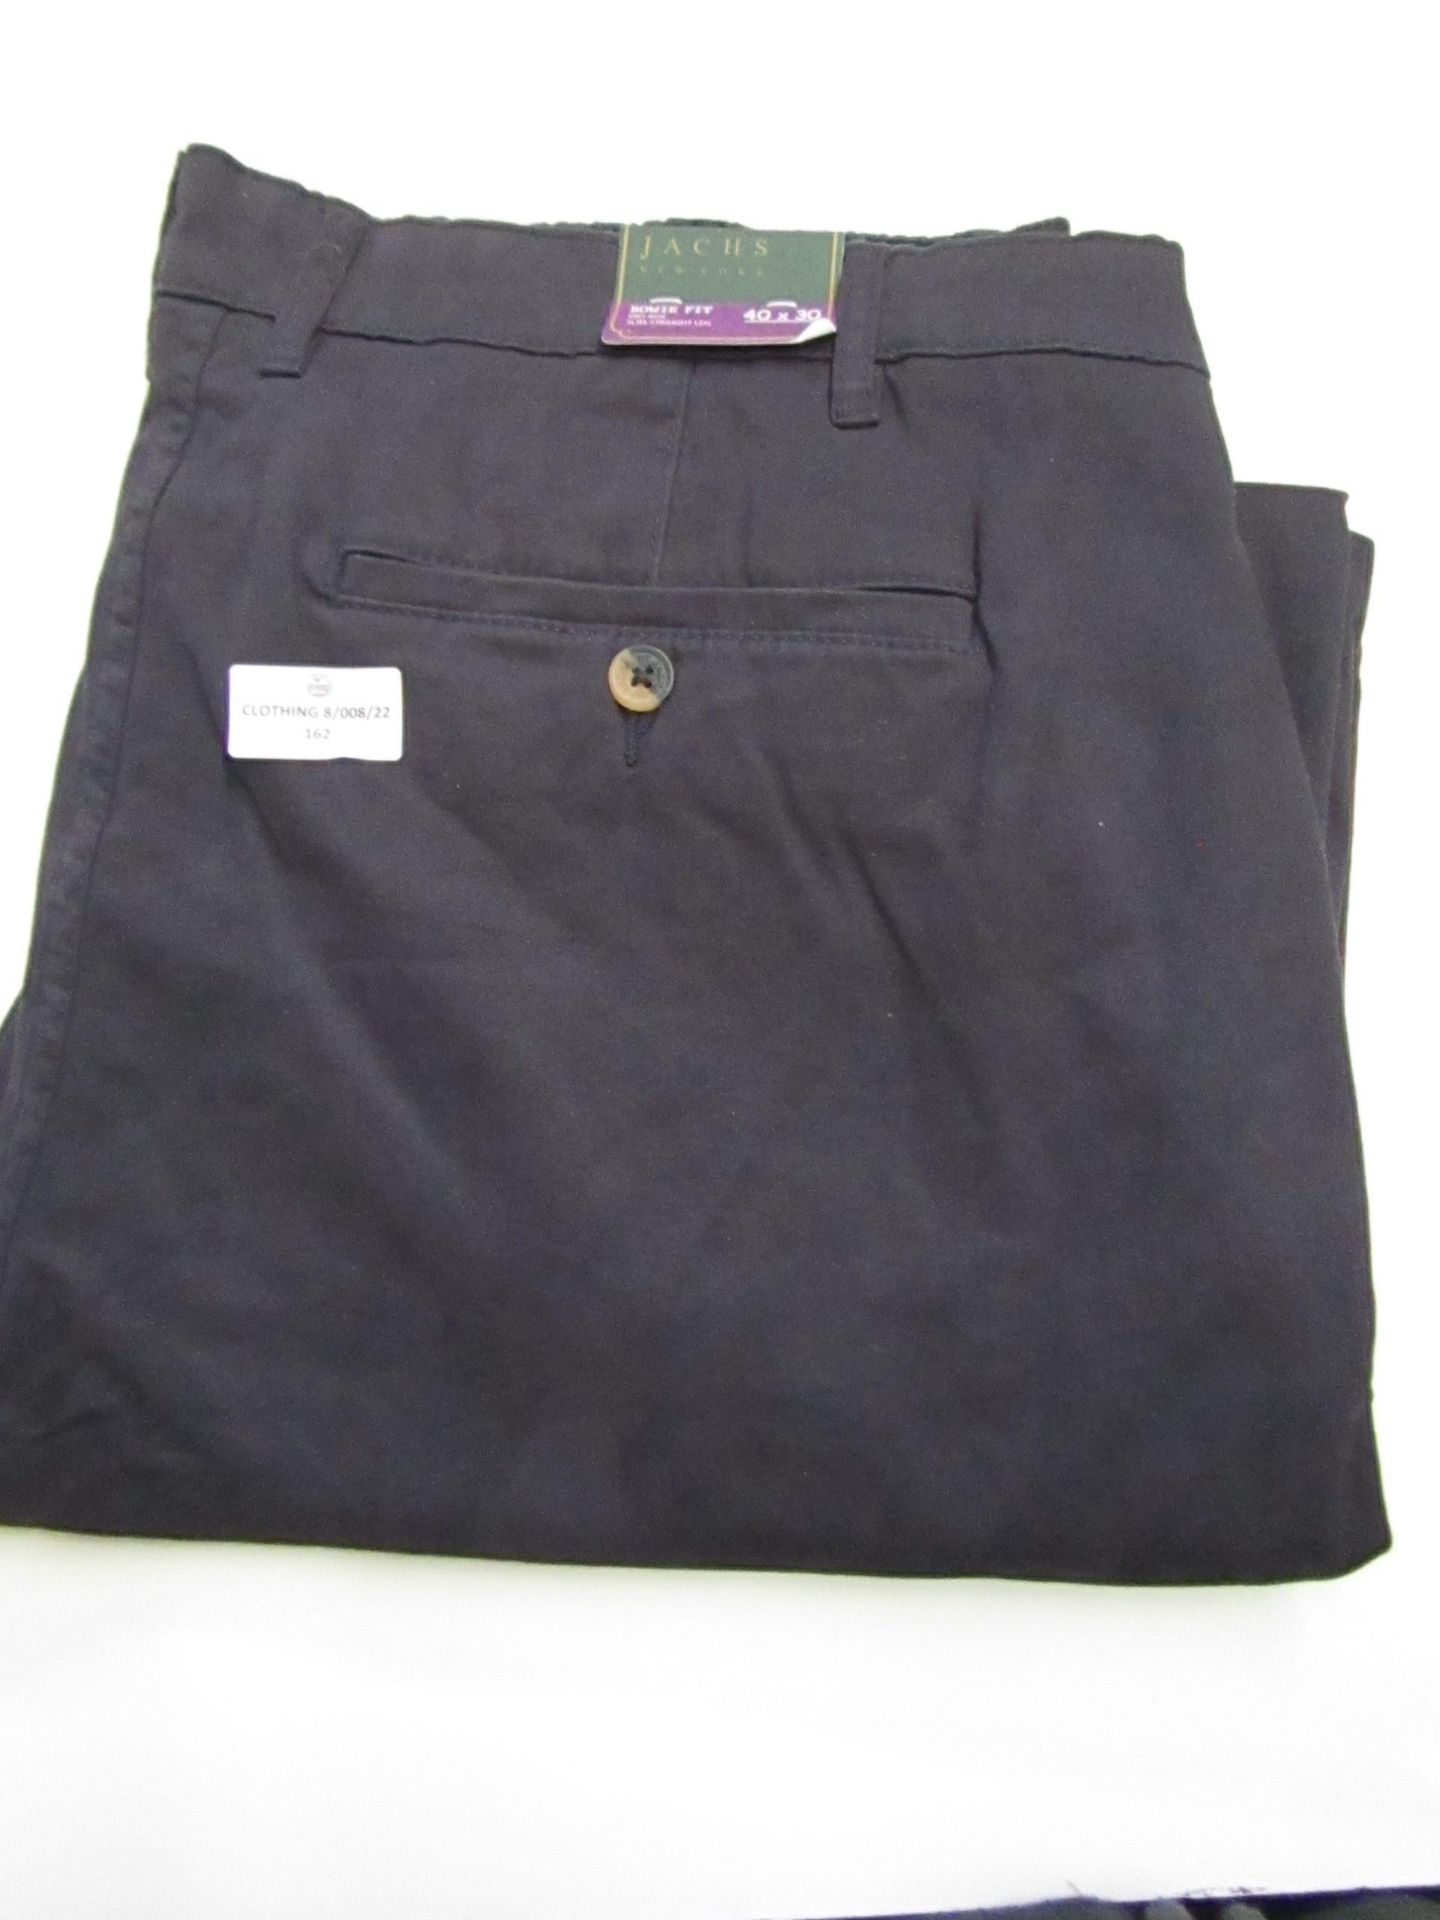 Jachs Bowie Fit Mid-Rise Slim Straight Leg Chinos Black Size W40 L30 New With Tags